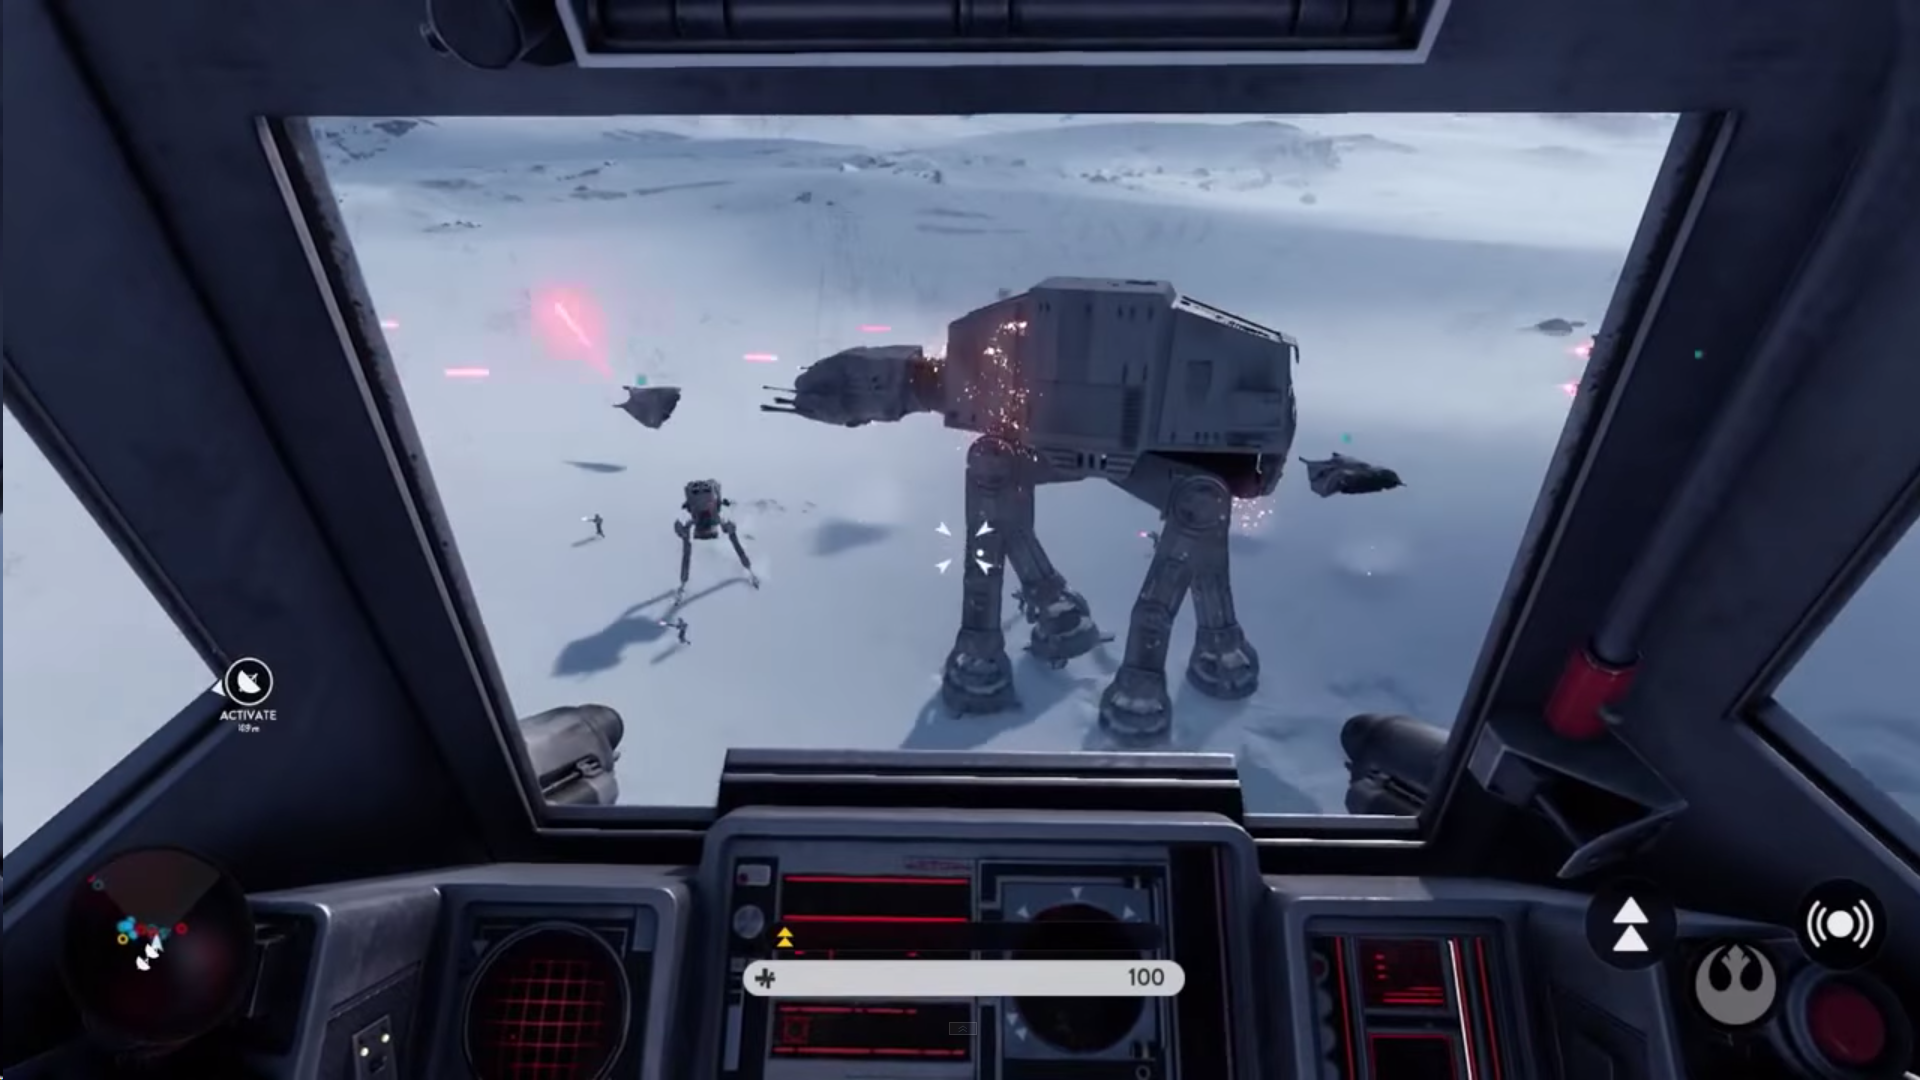 E3 2015: Star Wars Battlefront Gameplay Trailer Analysis - Is This The Best Battle of Hoth Ever?